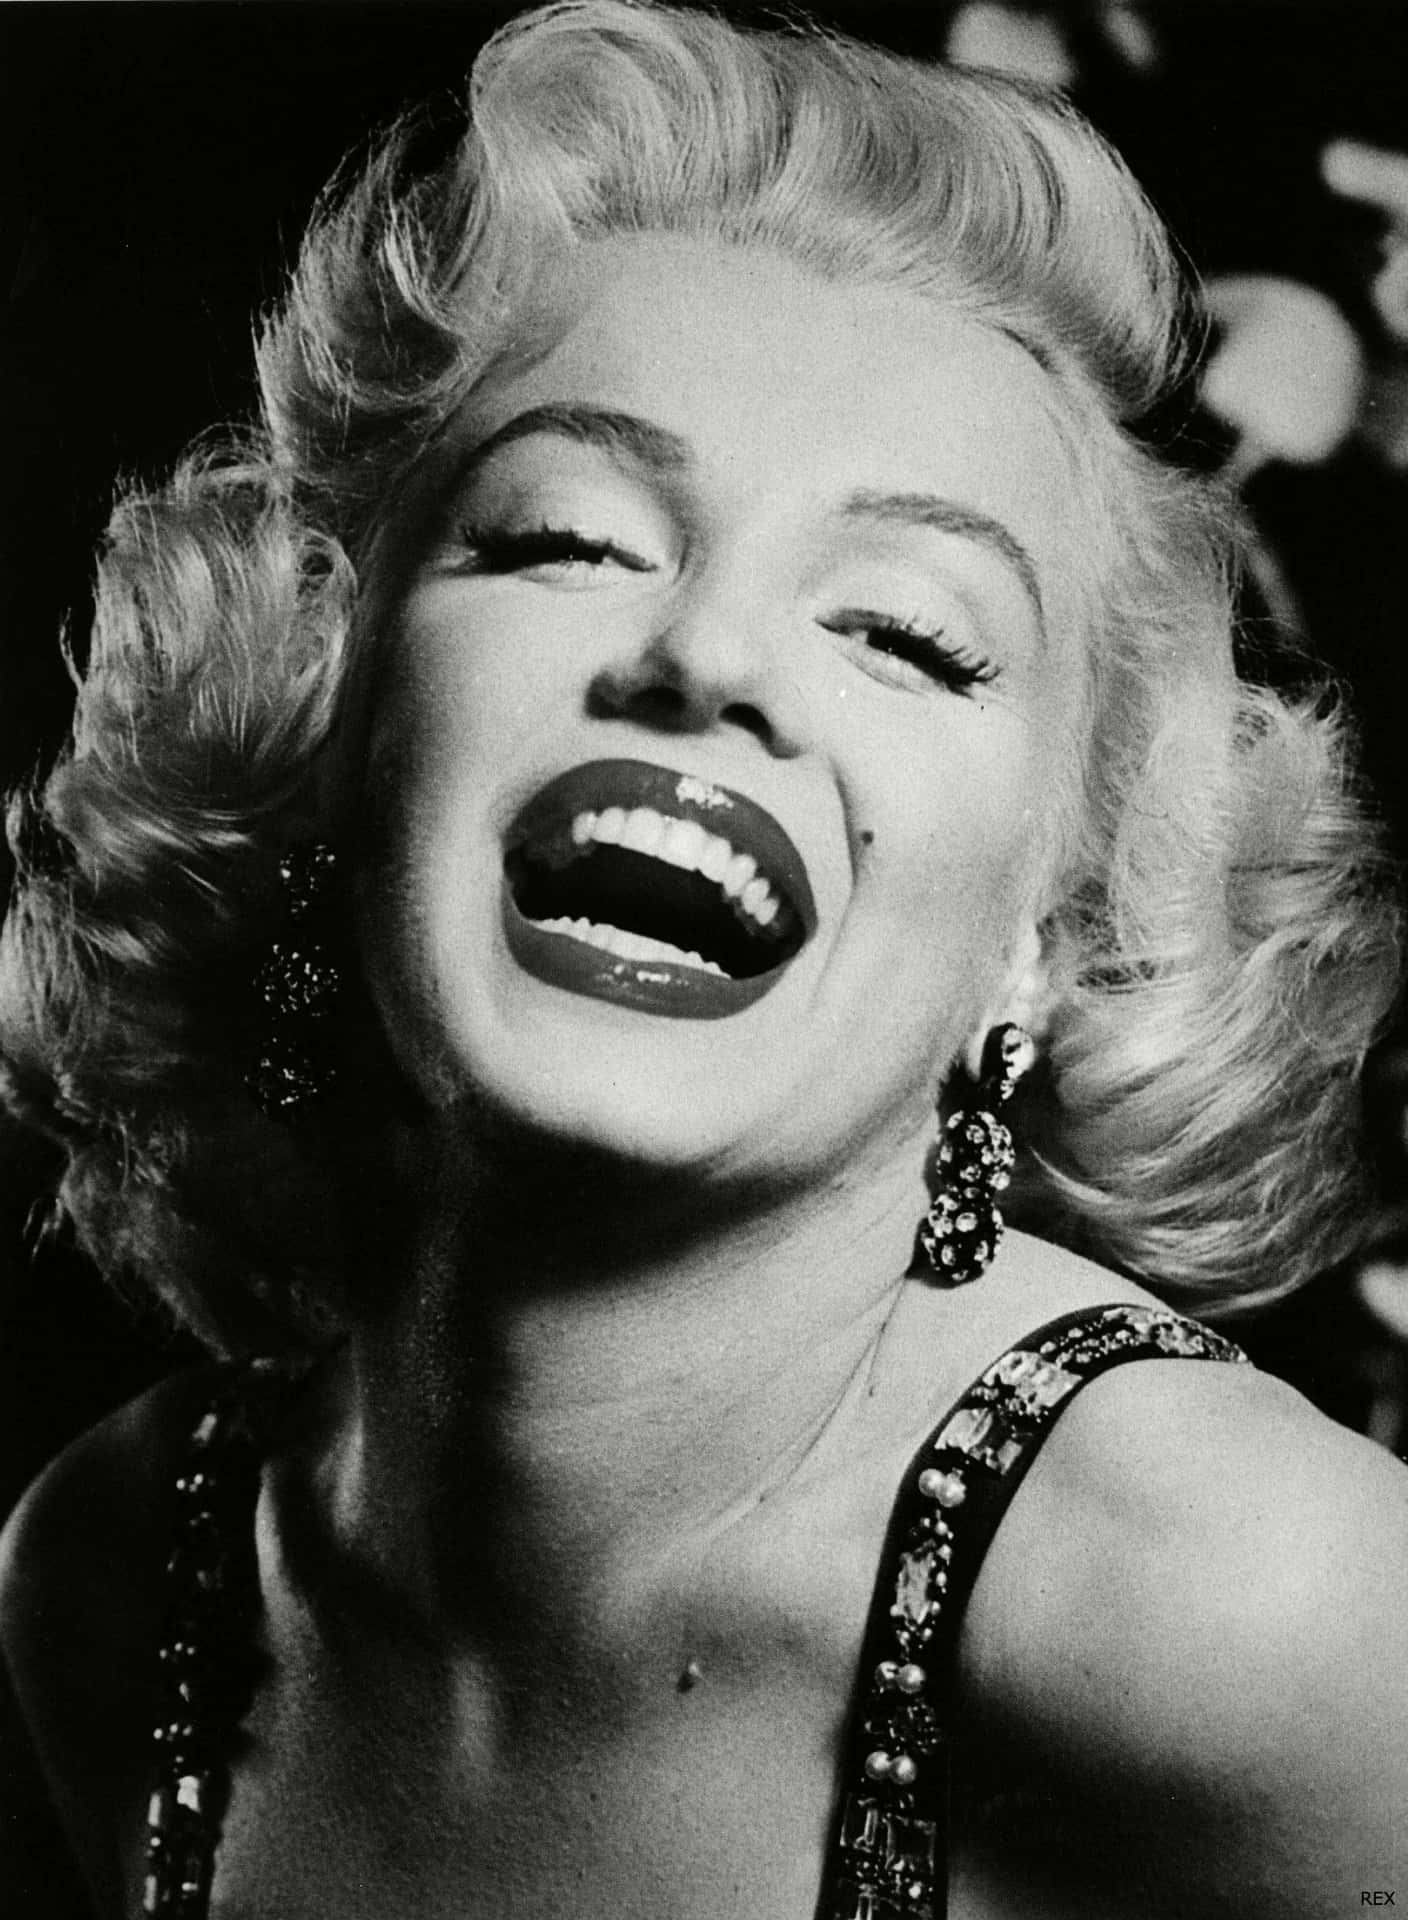 "Here I am with my trusty Marilyn Monroe Iphone" Wallpaper